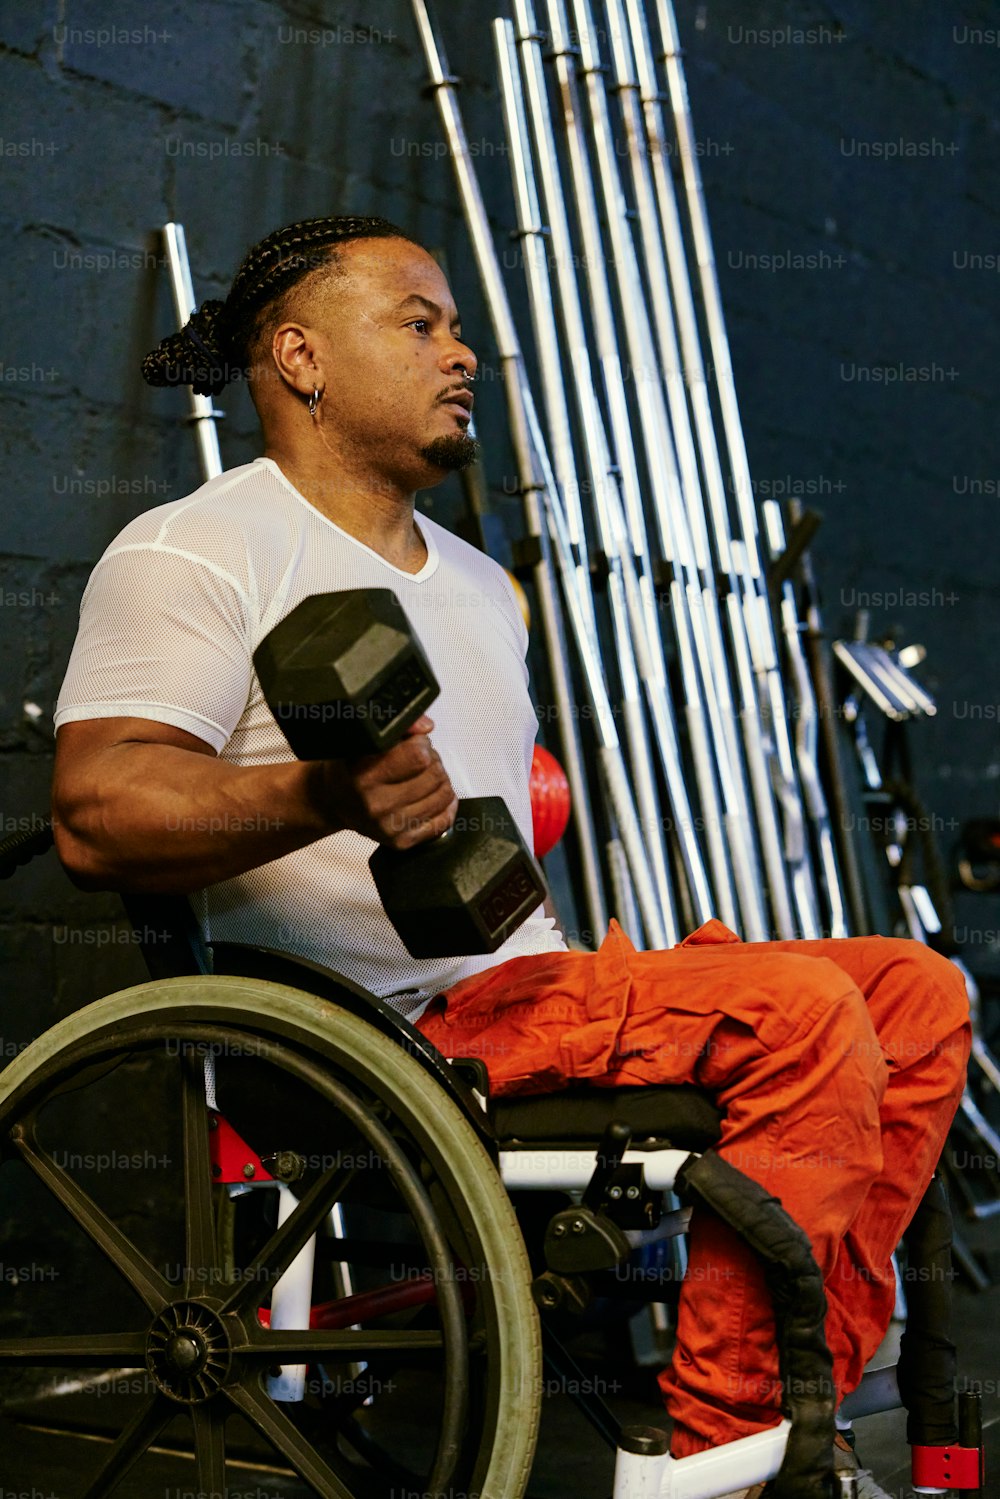 a man sitting in a wheel chair holding a pair of dumbbells